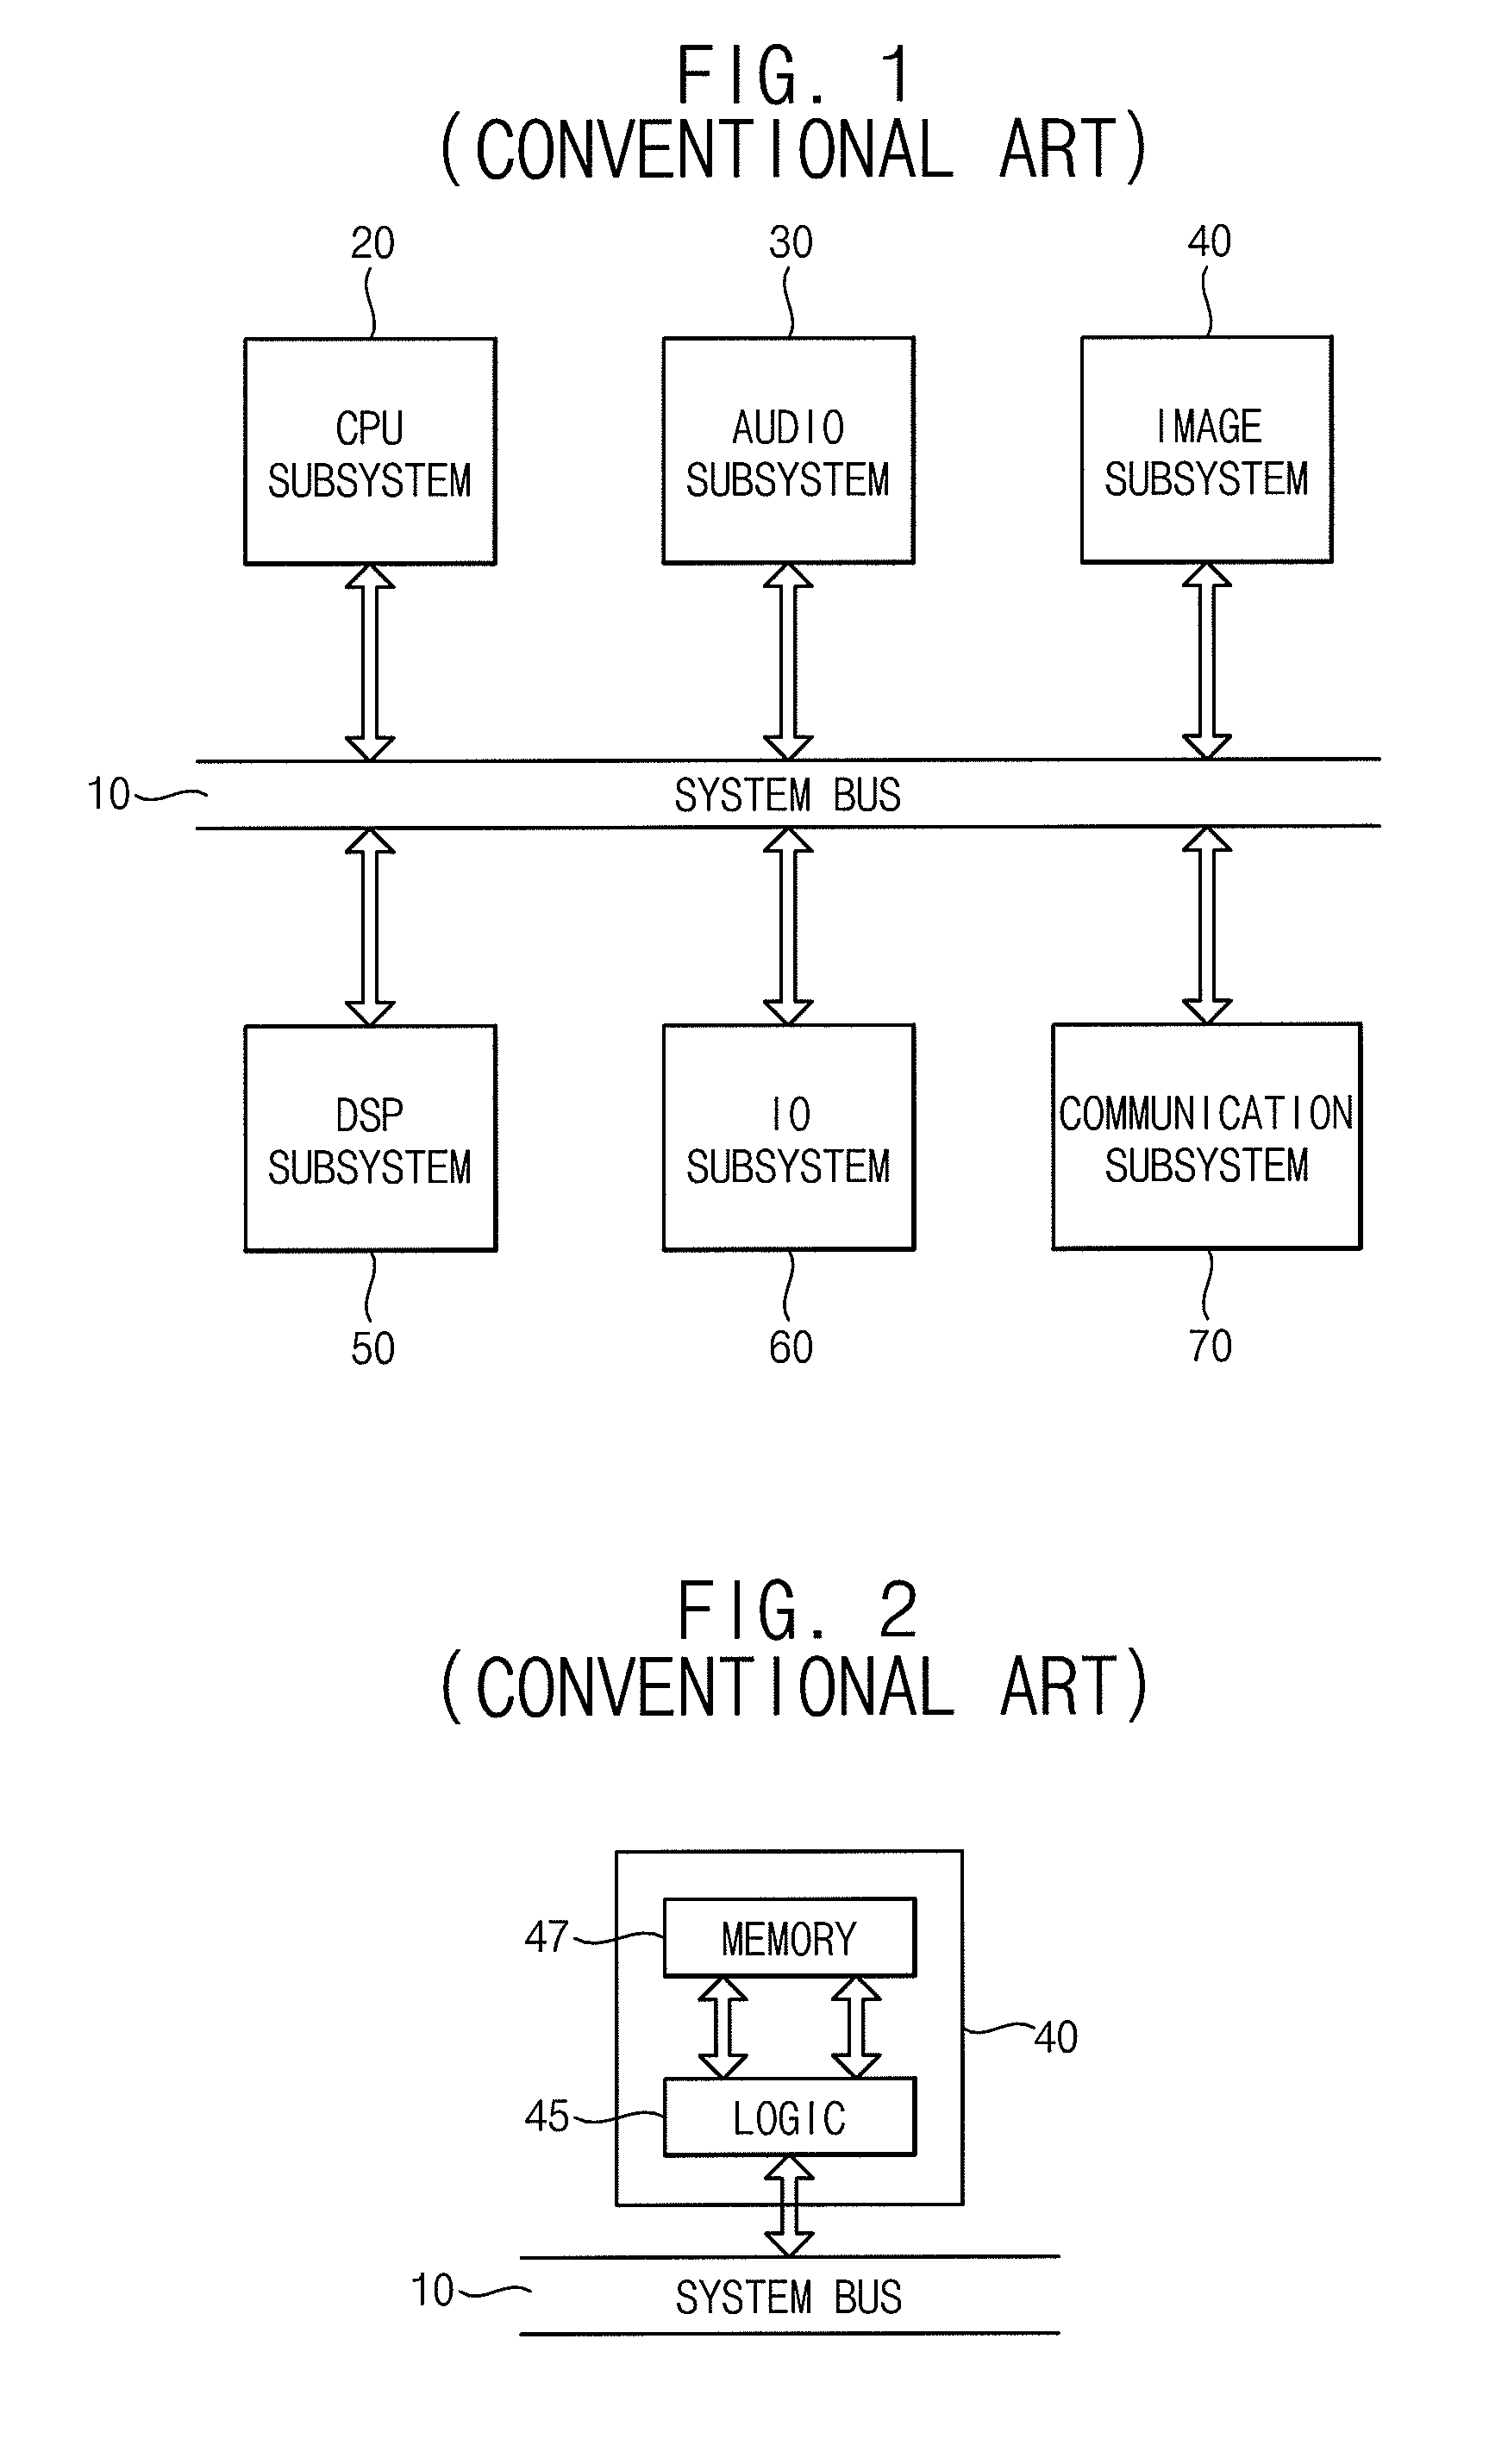 System on chip including an image processing memory with multiple access